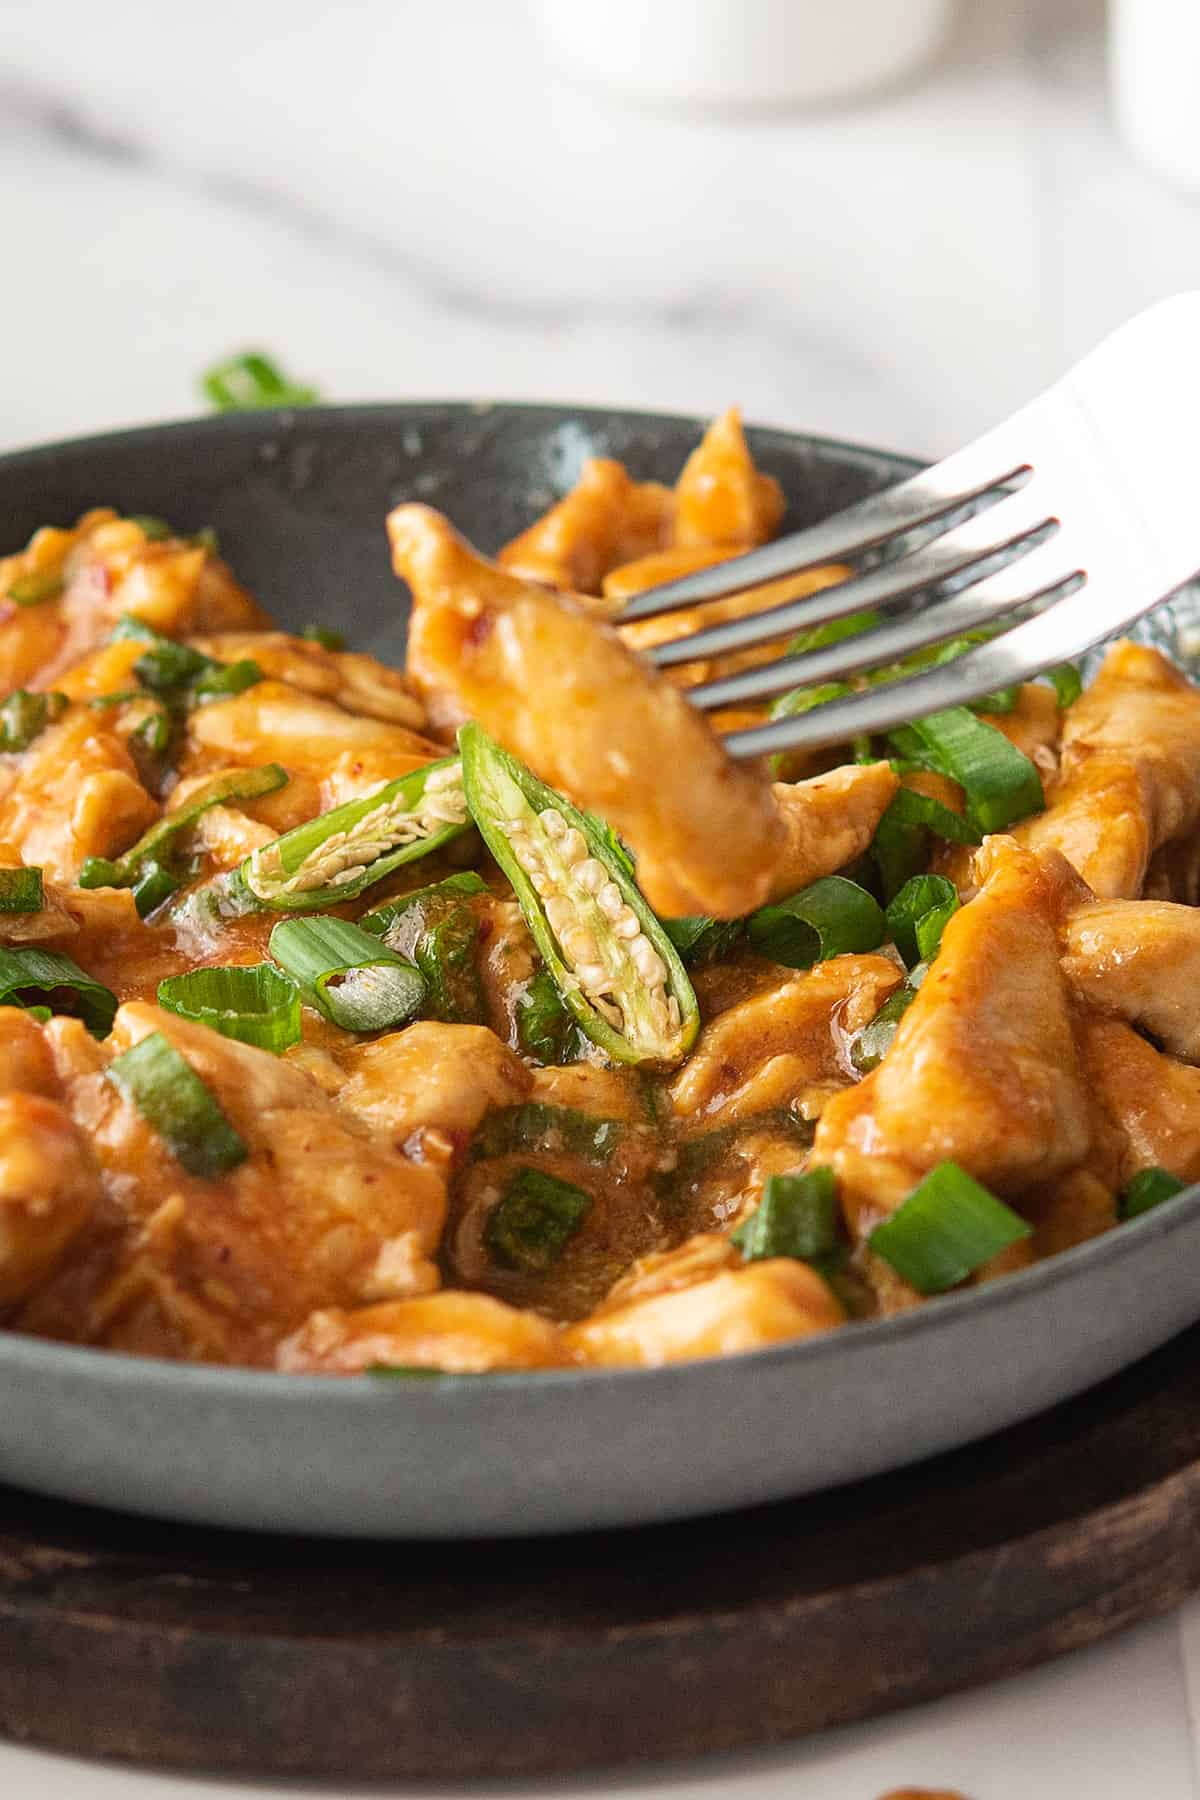 juicy chicken tossed in a hot and spicy sauce